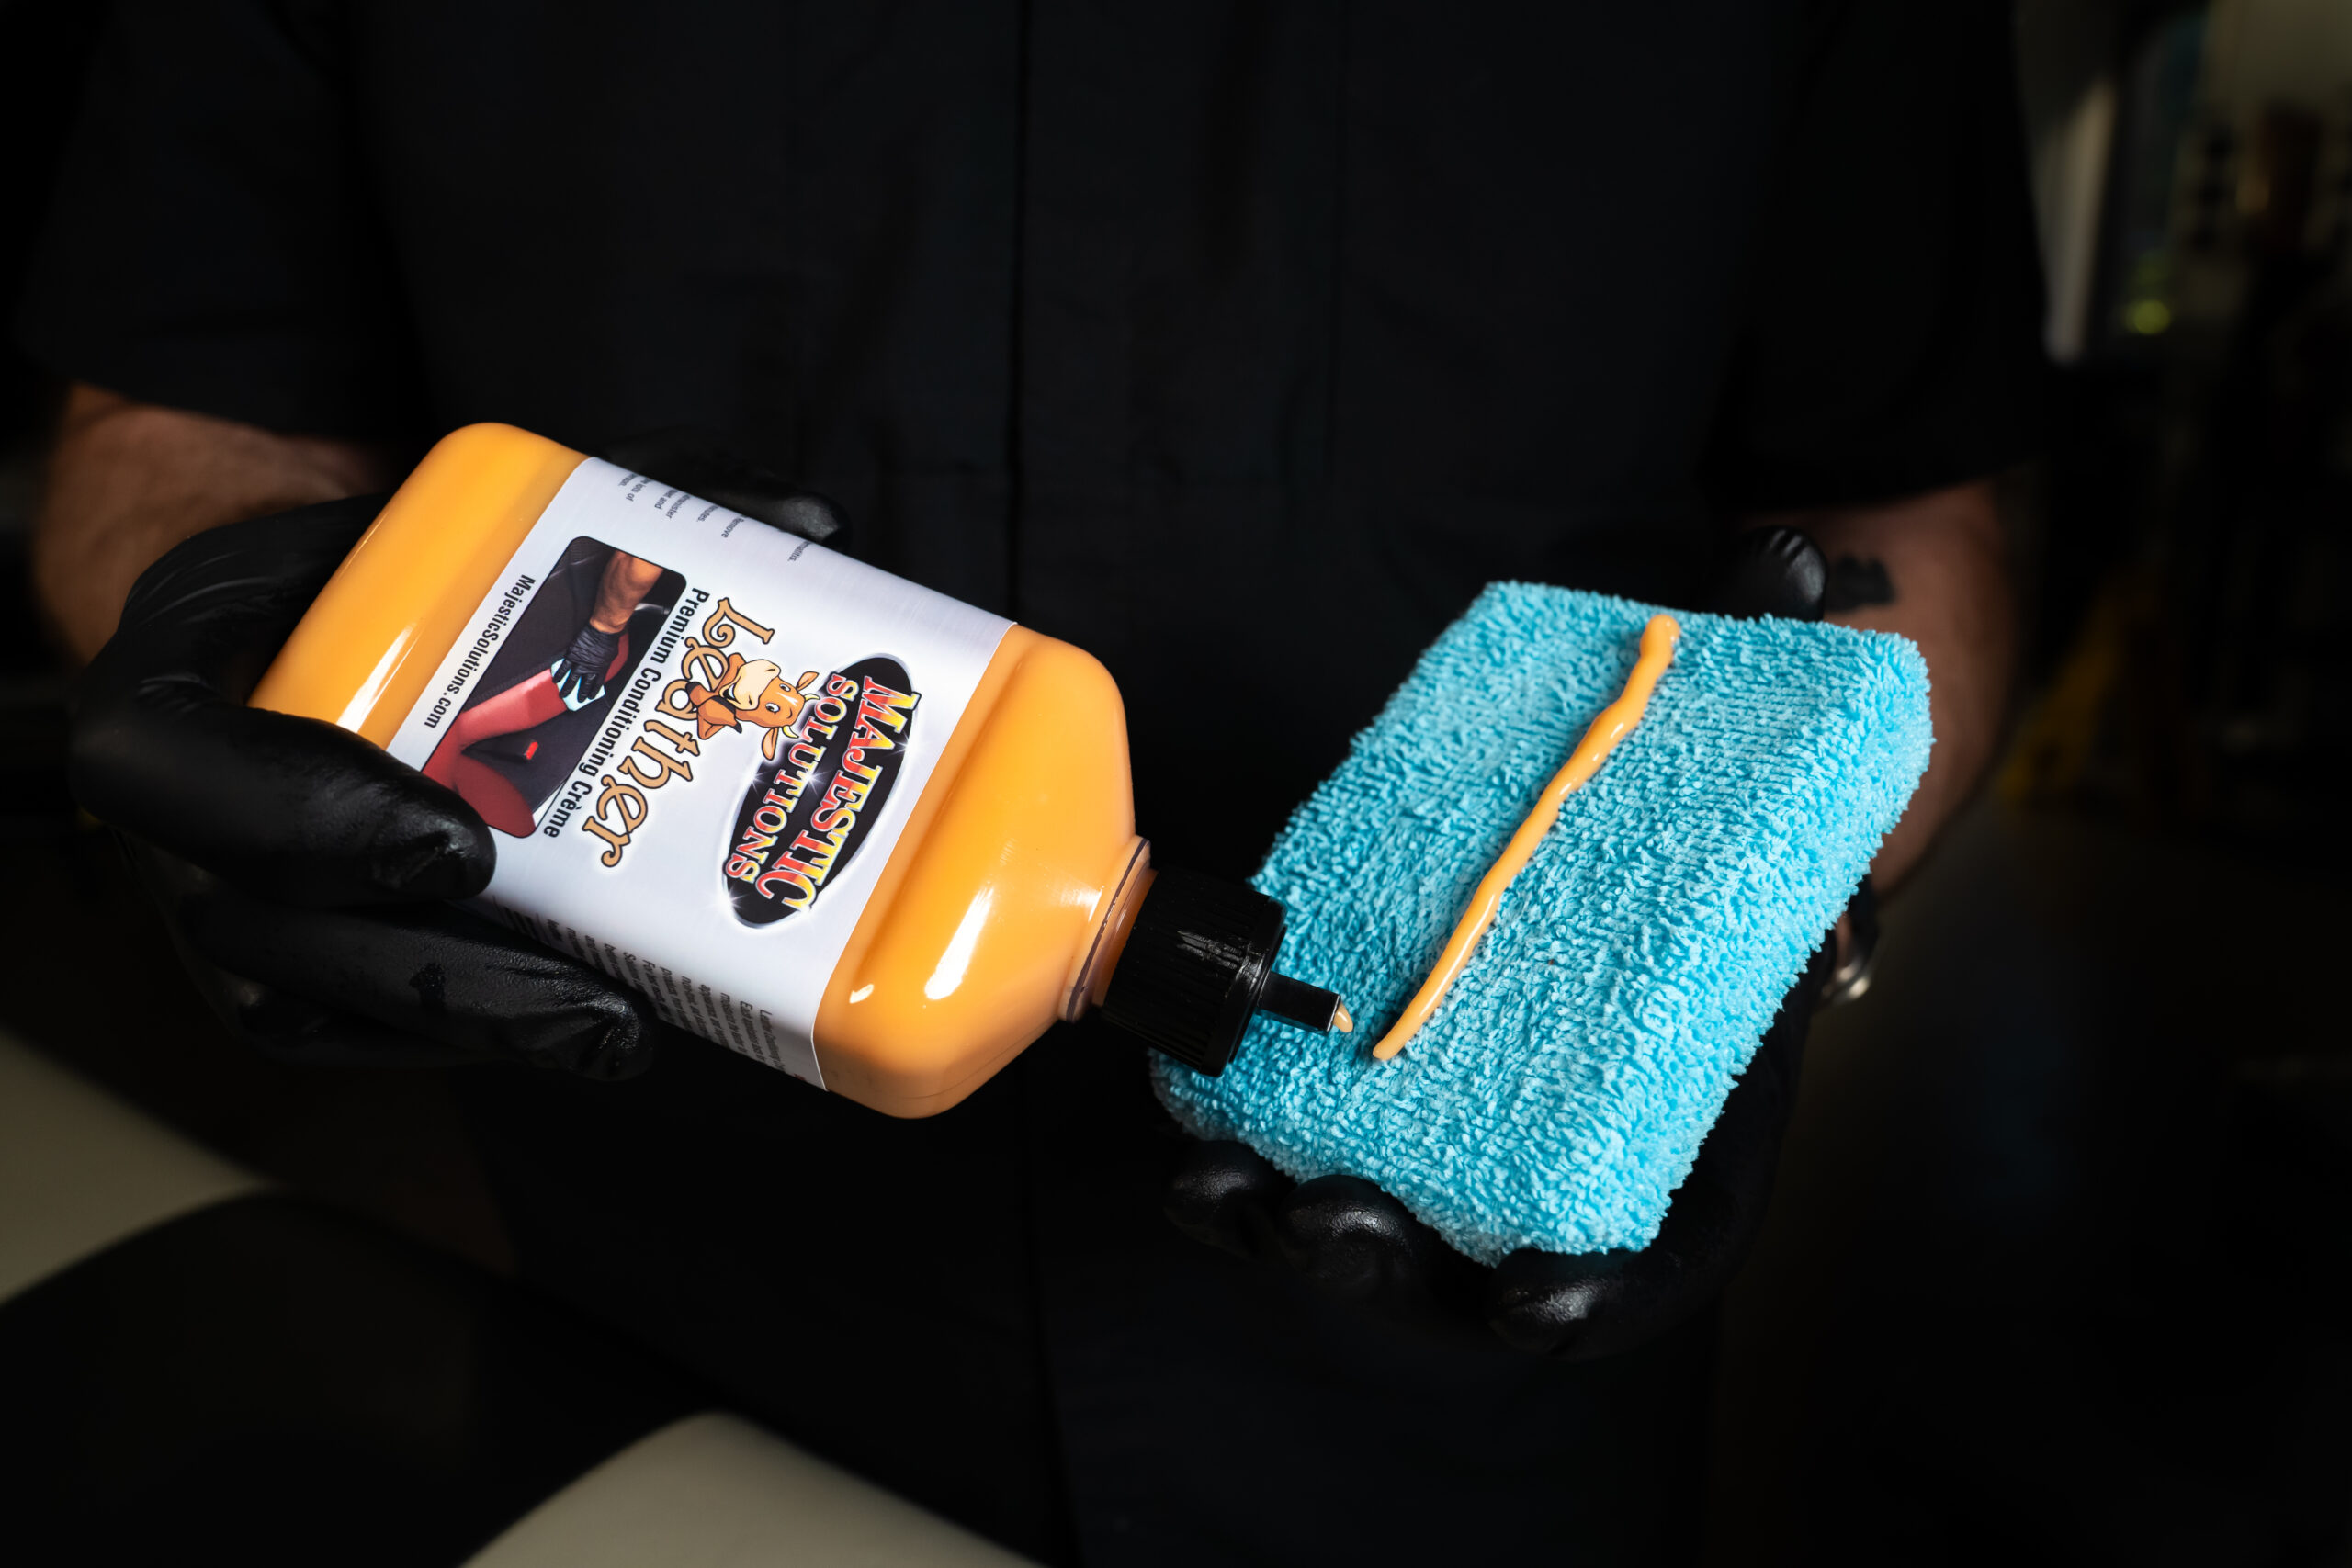 Leather Conditioner for Cars